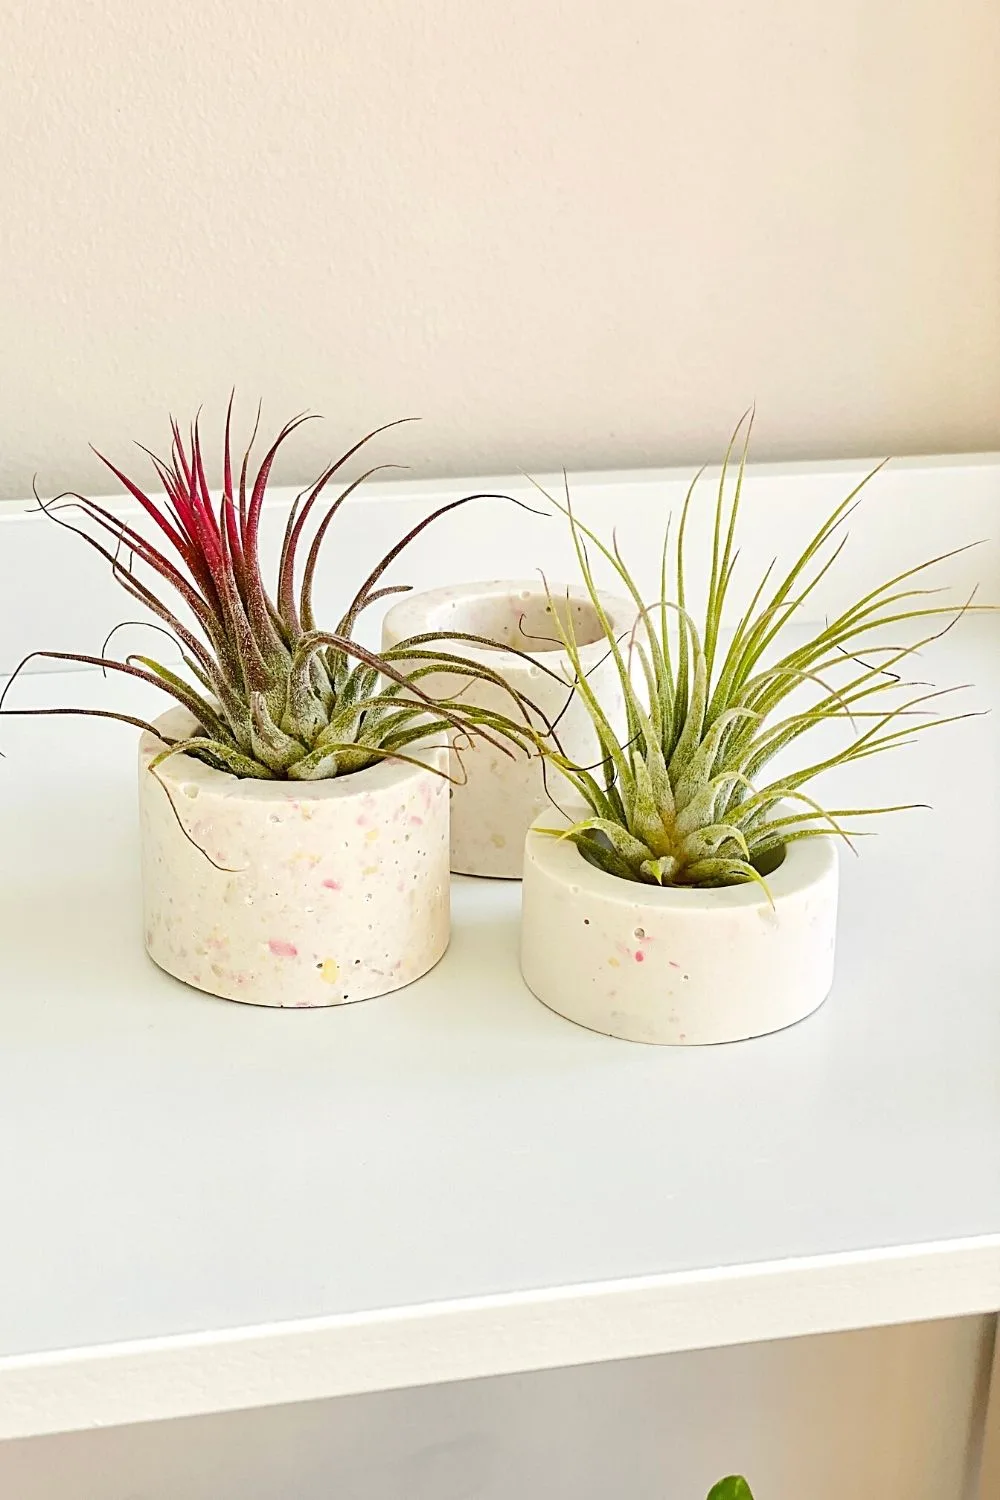 Air Plant (Tillandsia spp.) does not require soil to grow unlike traditional plants